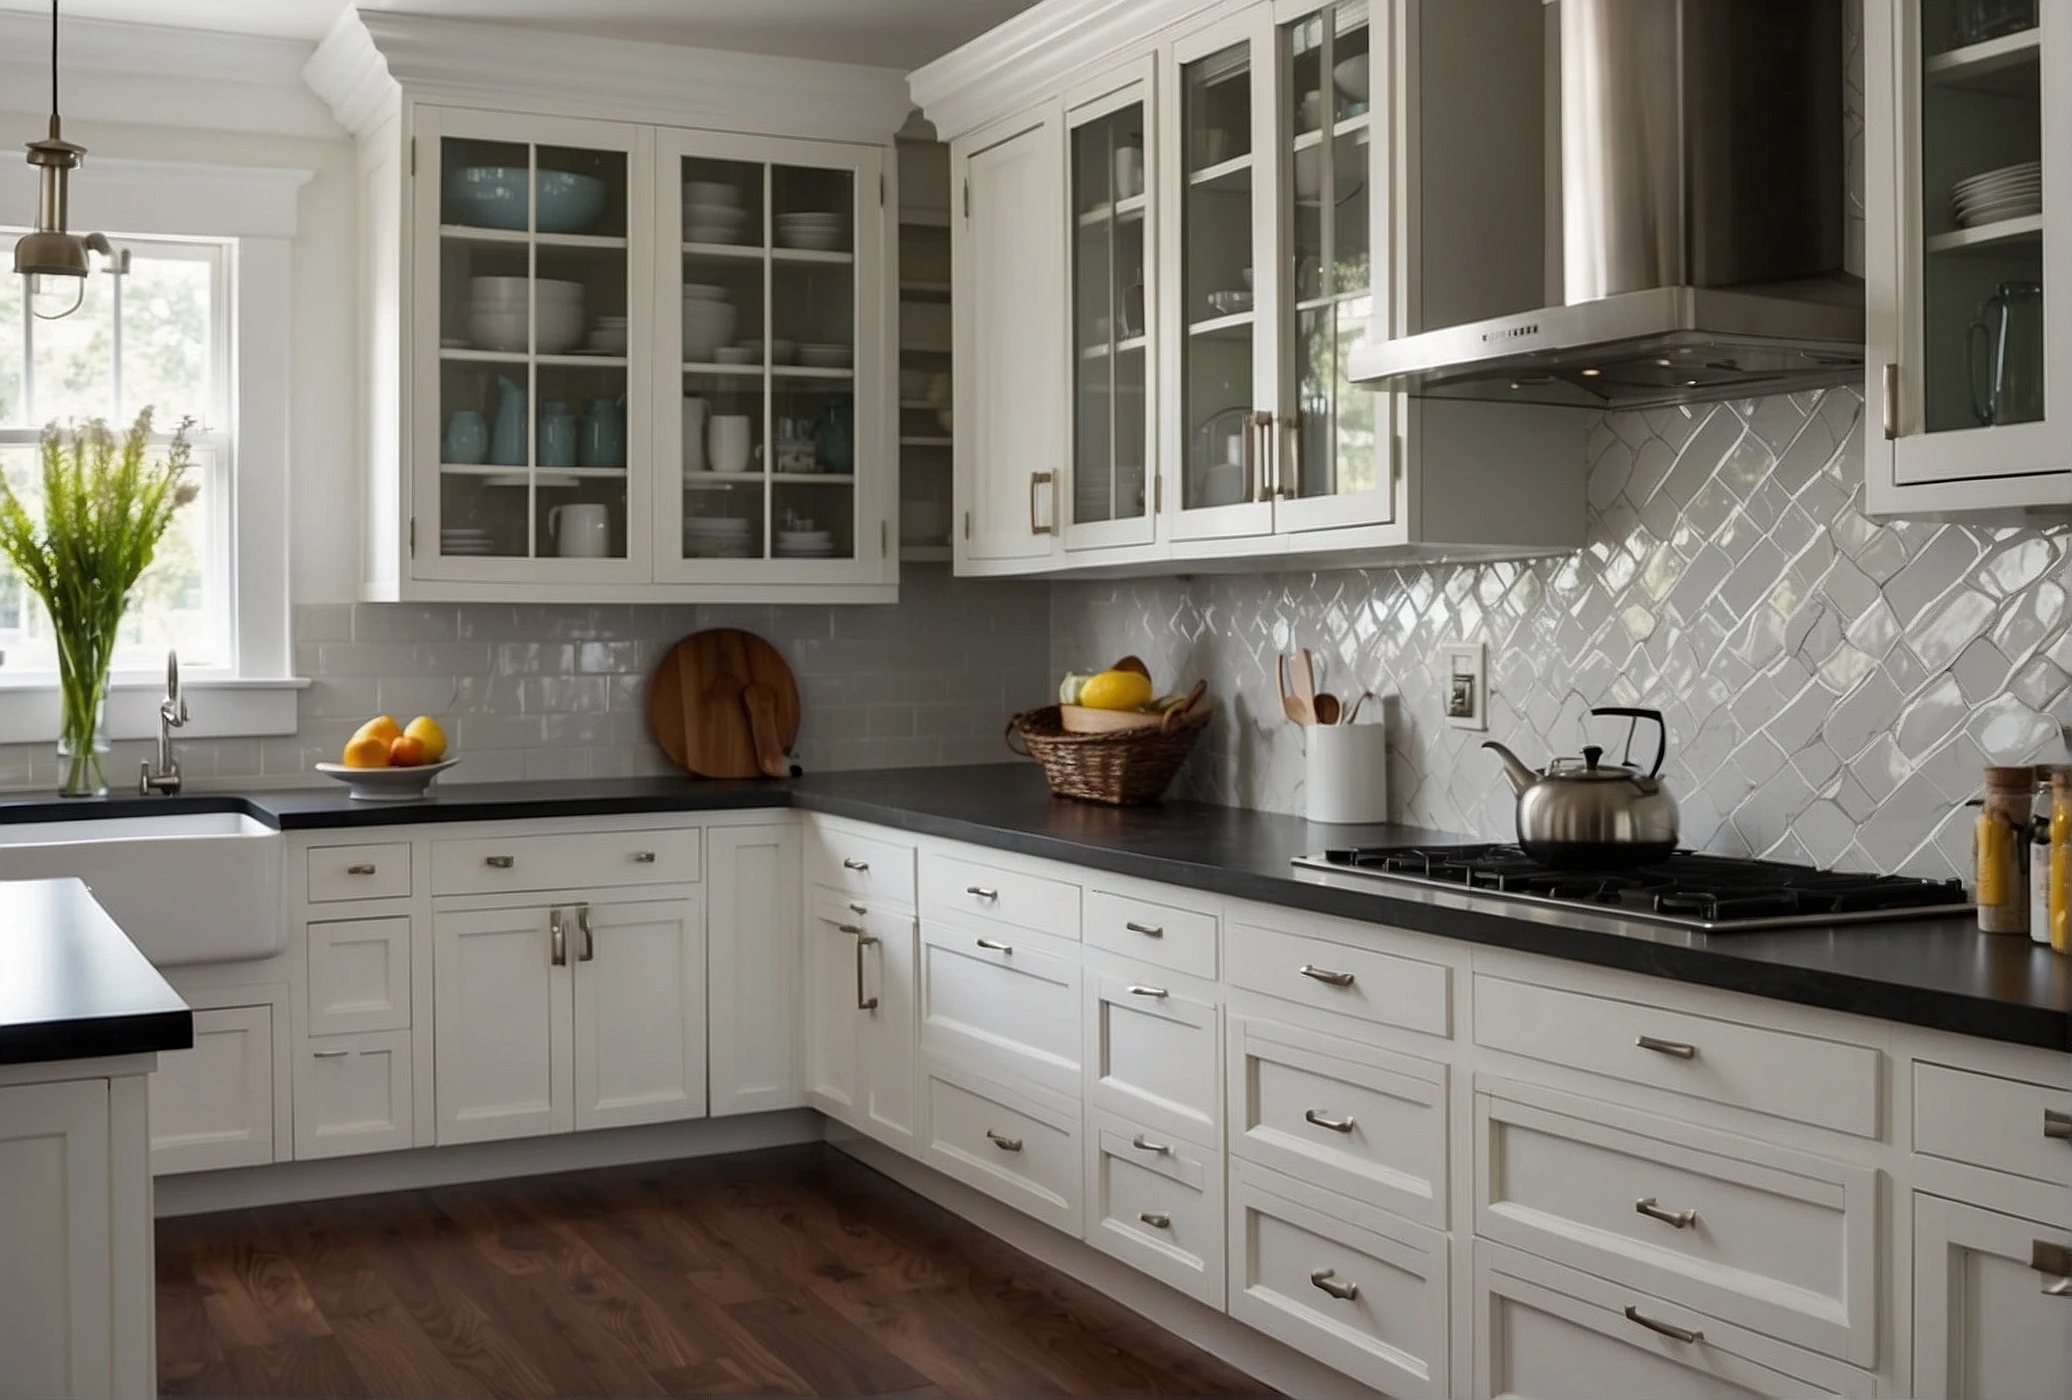 High Contrast Backsplashes For White Cabinets Ideas 3